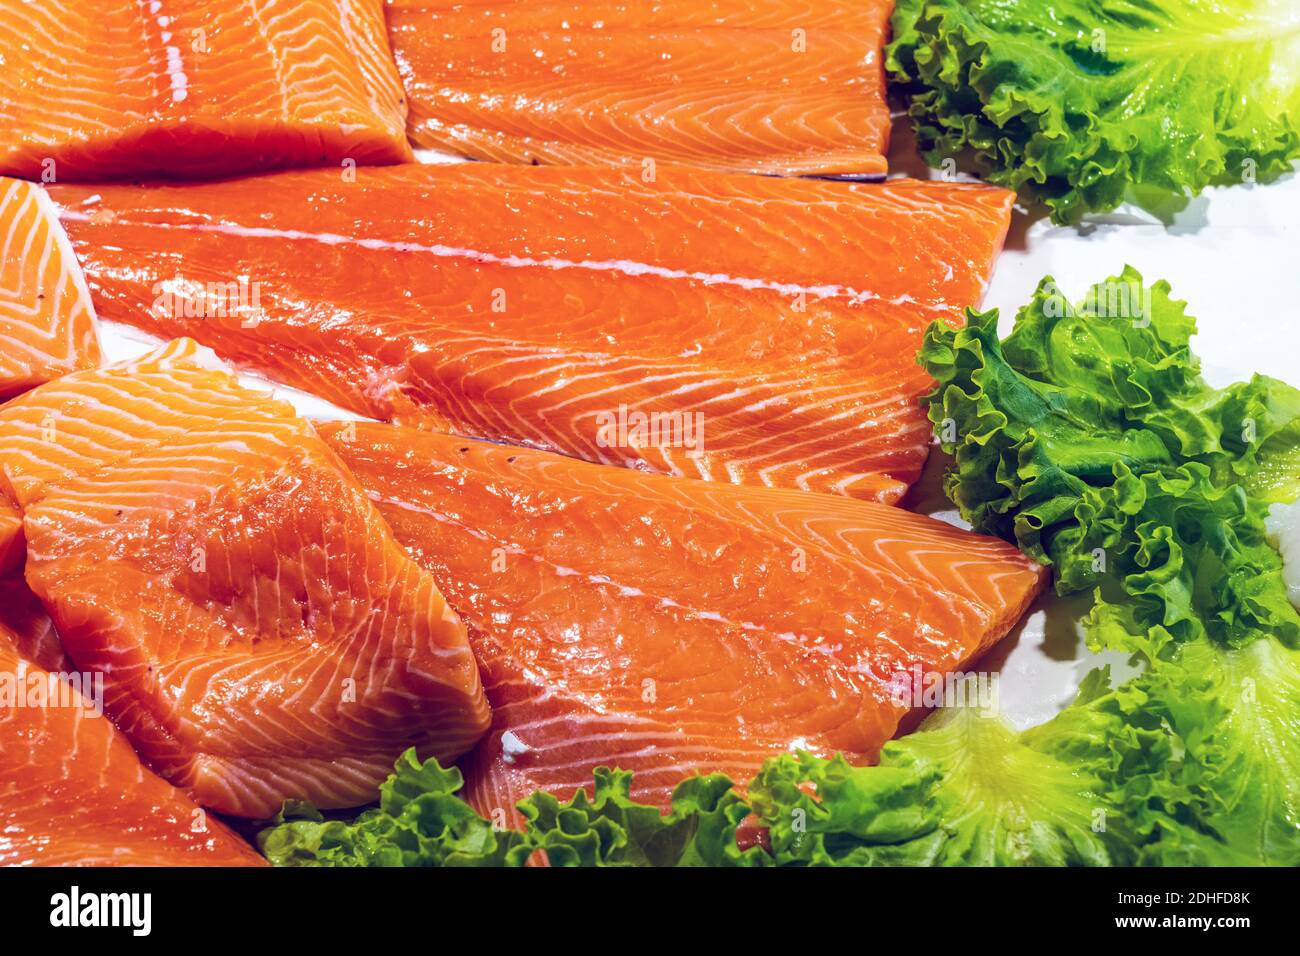 Fresh salmon fillet for sale at a market in Venice, Italy Stock Photo